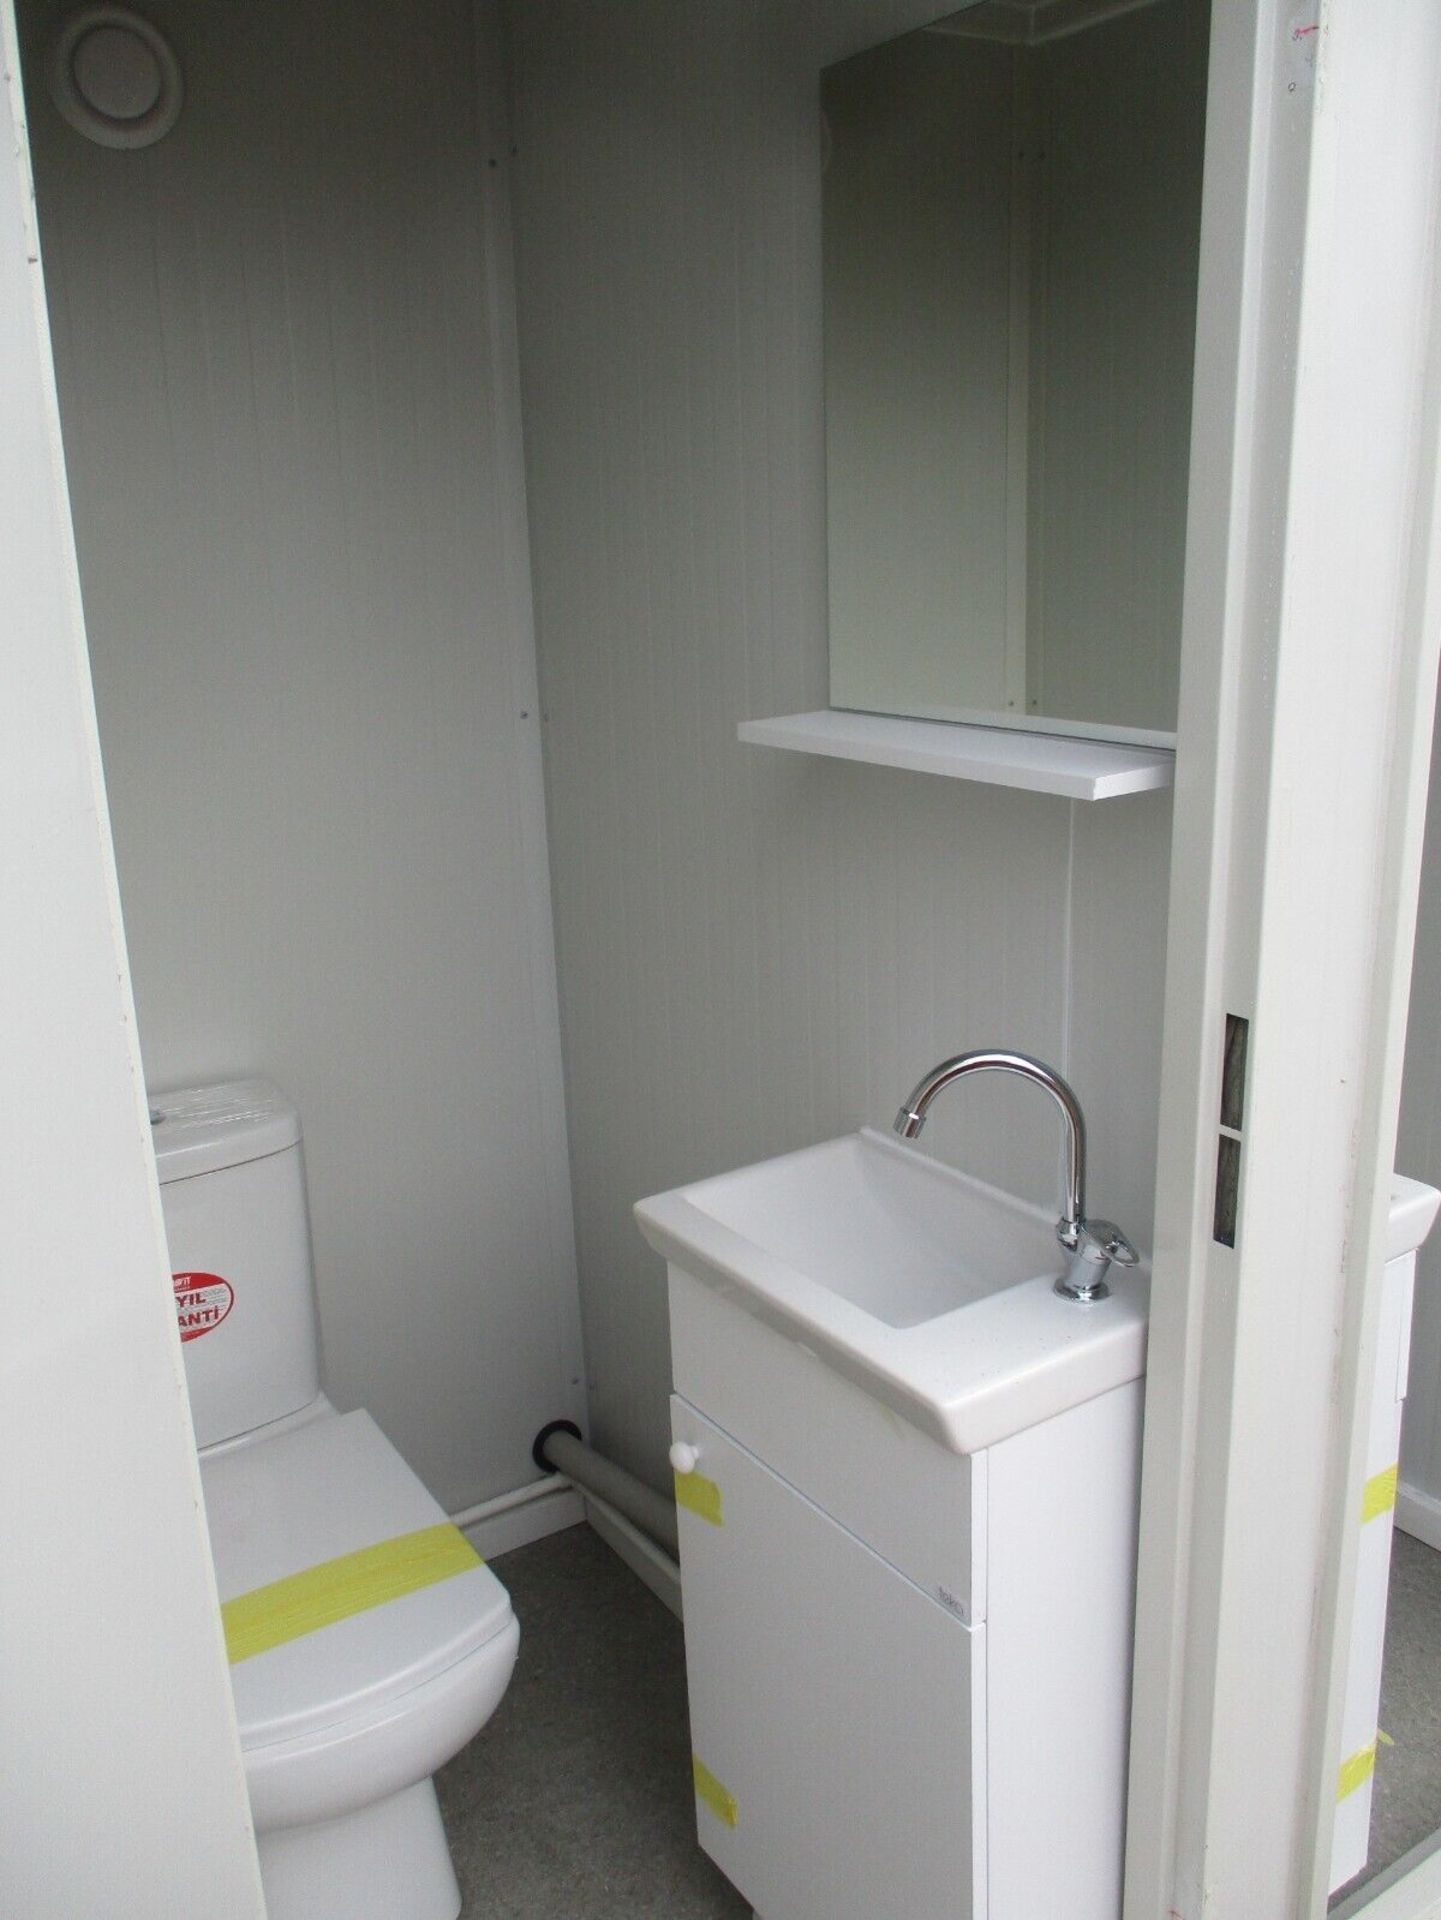 2.15M X 1.3M SHIPPING CONTAINER TOILET BLOCK - Image 6 of 8